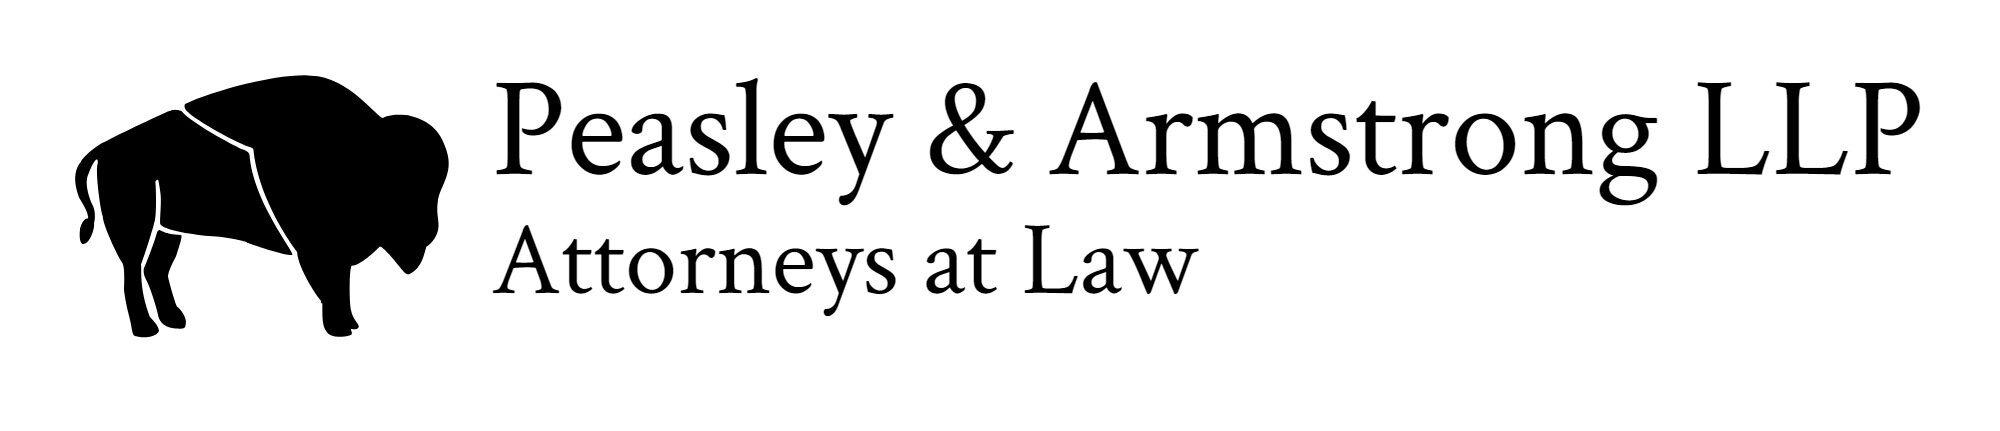 Peasley &amp; Armstrong LLP